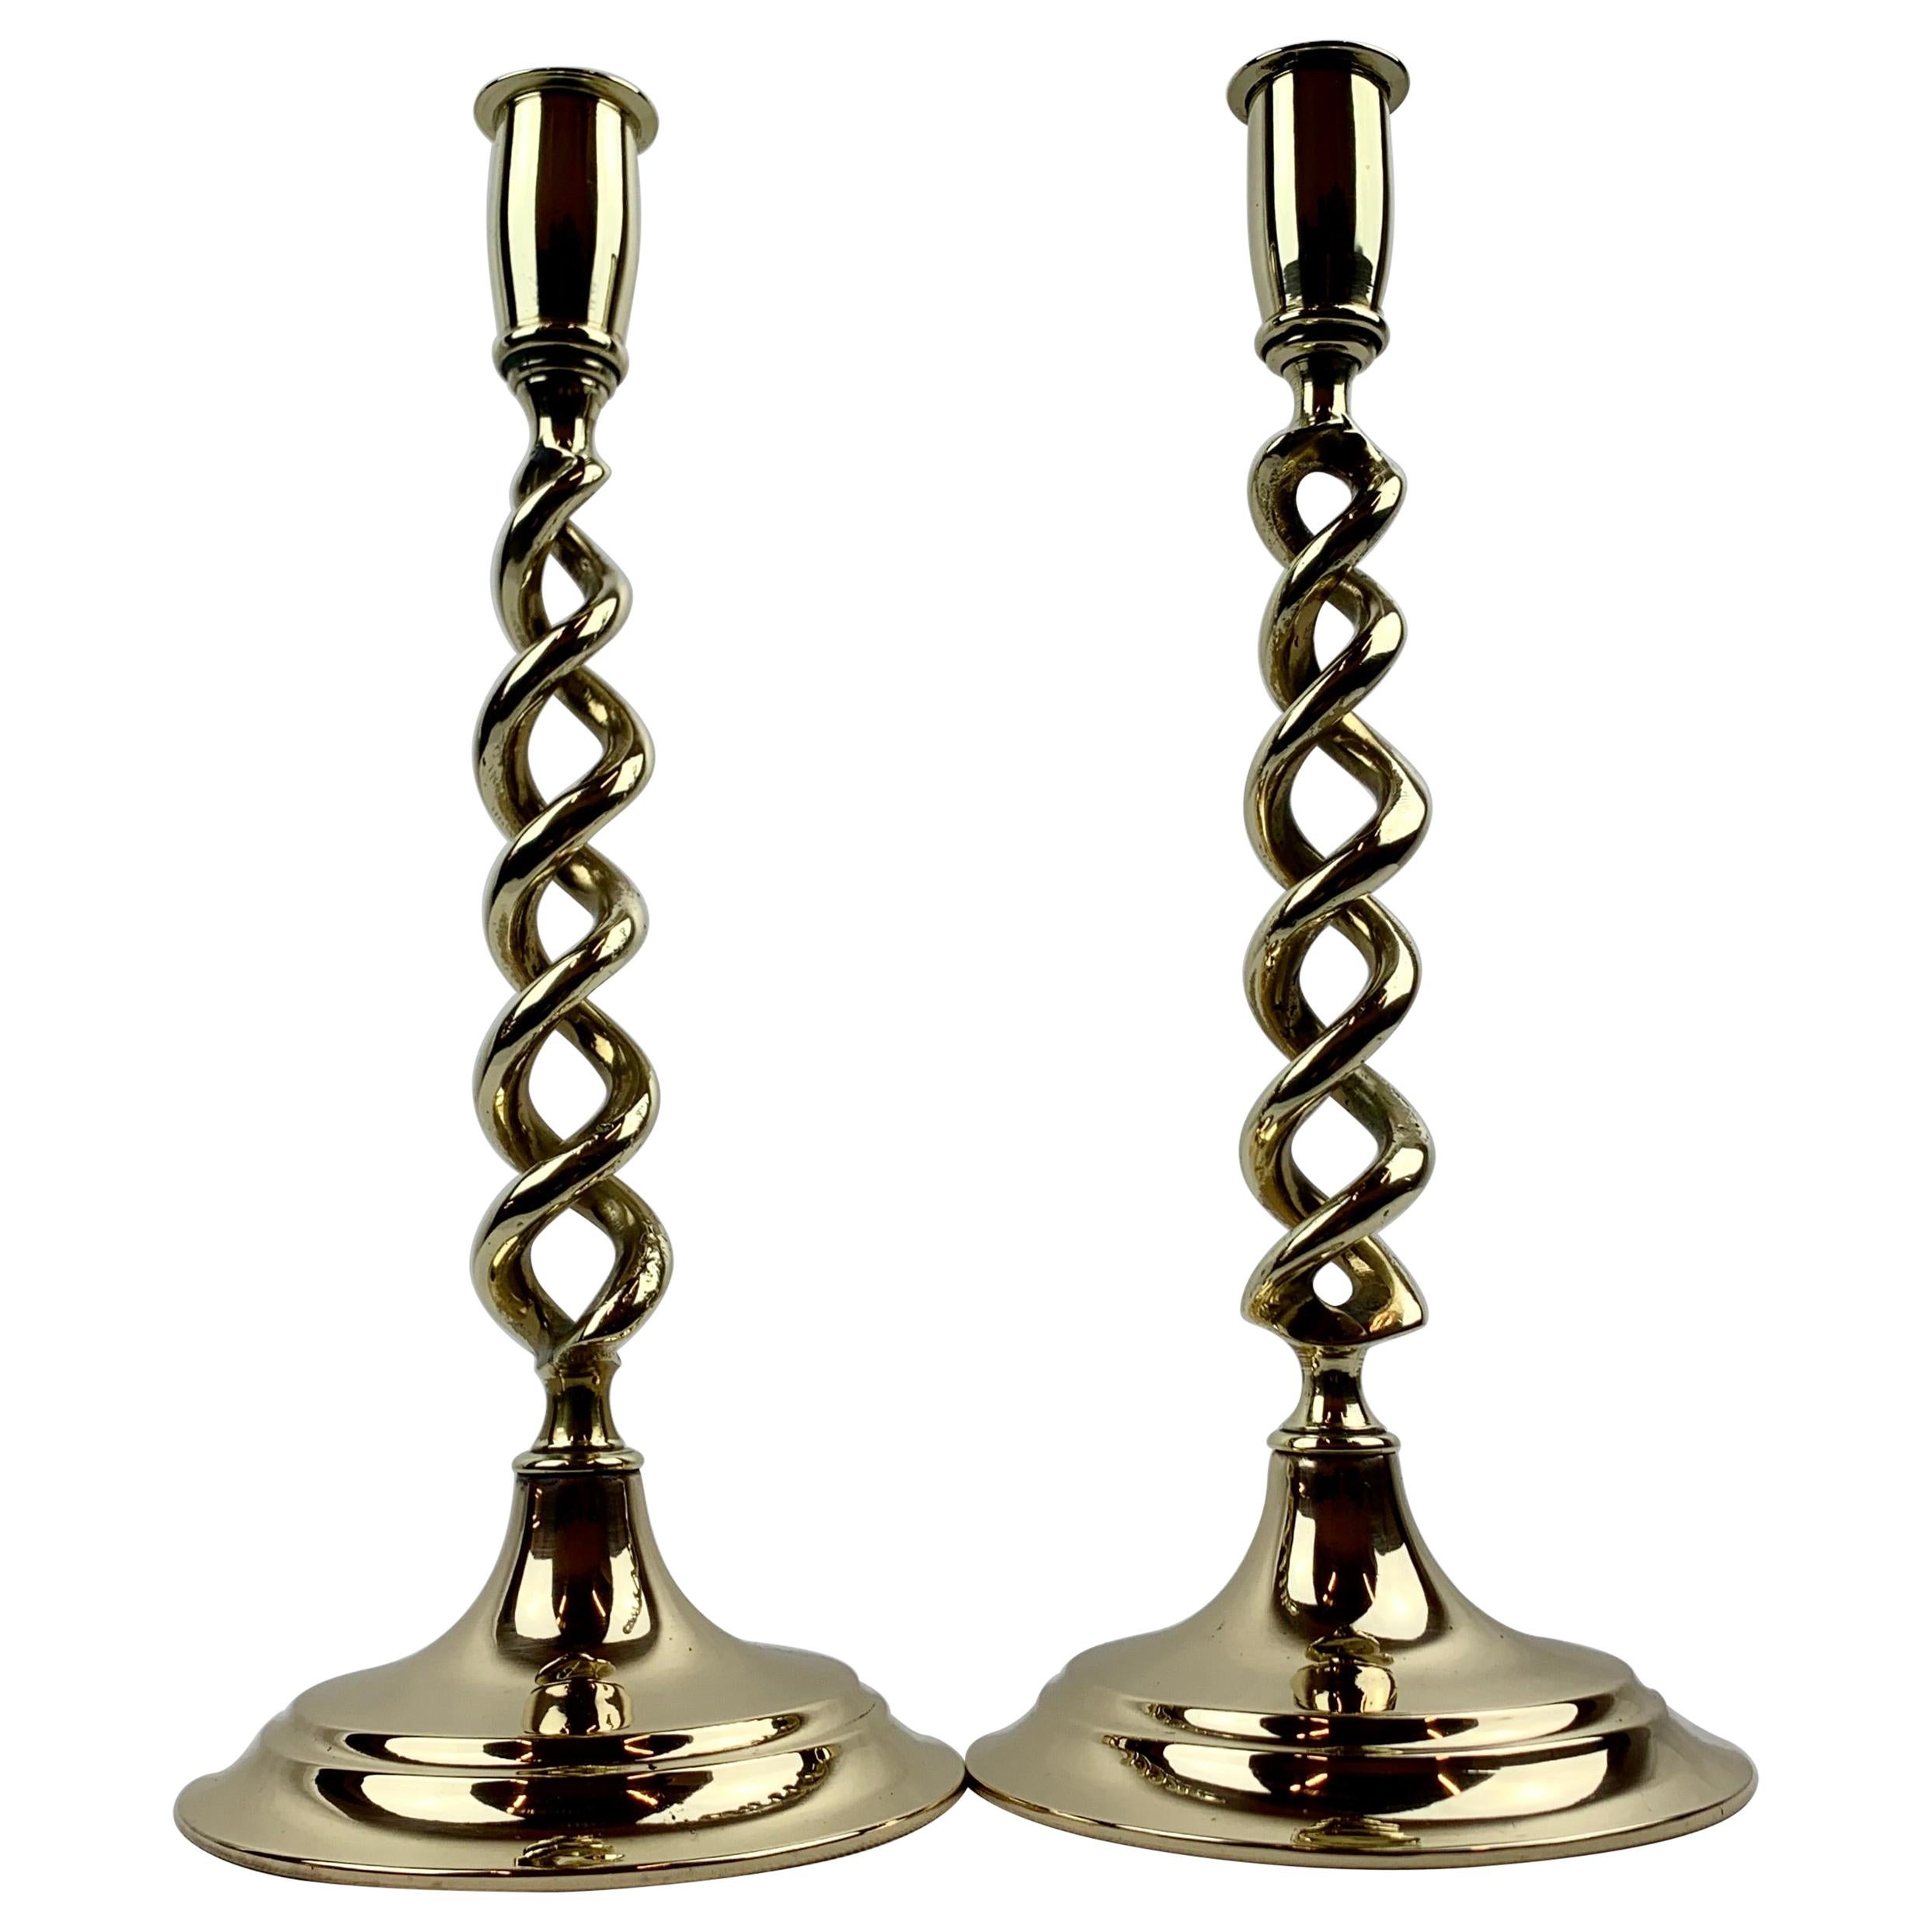 Solid Brass Open Barley Twist Candlesticks with Round Bases- 19th c.